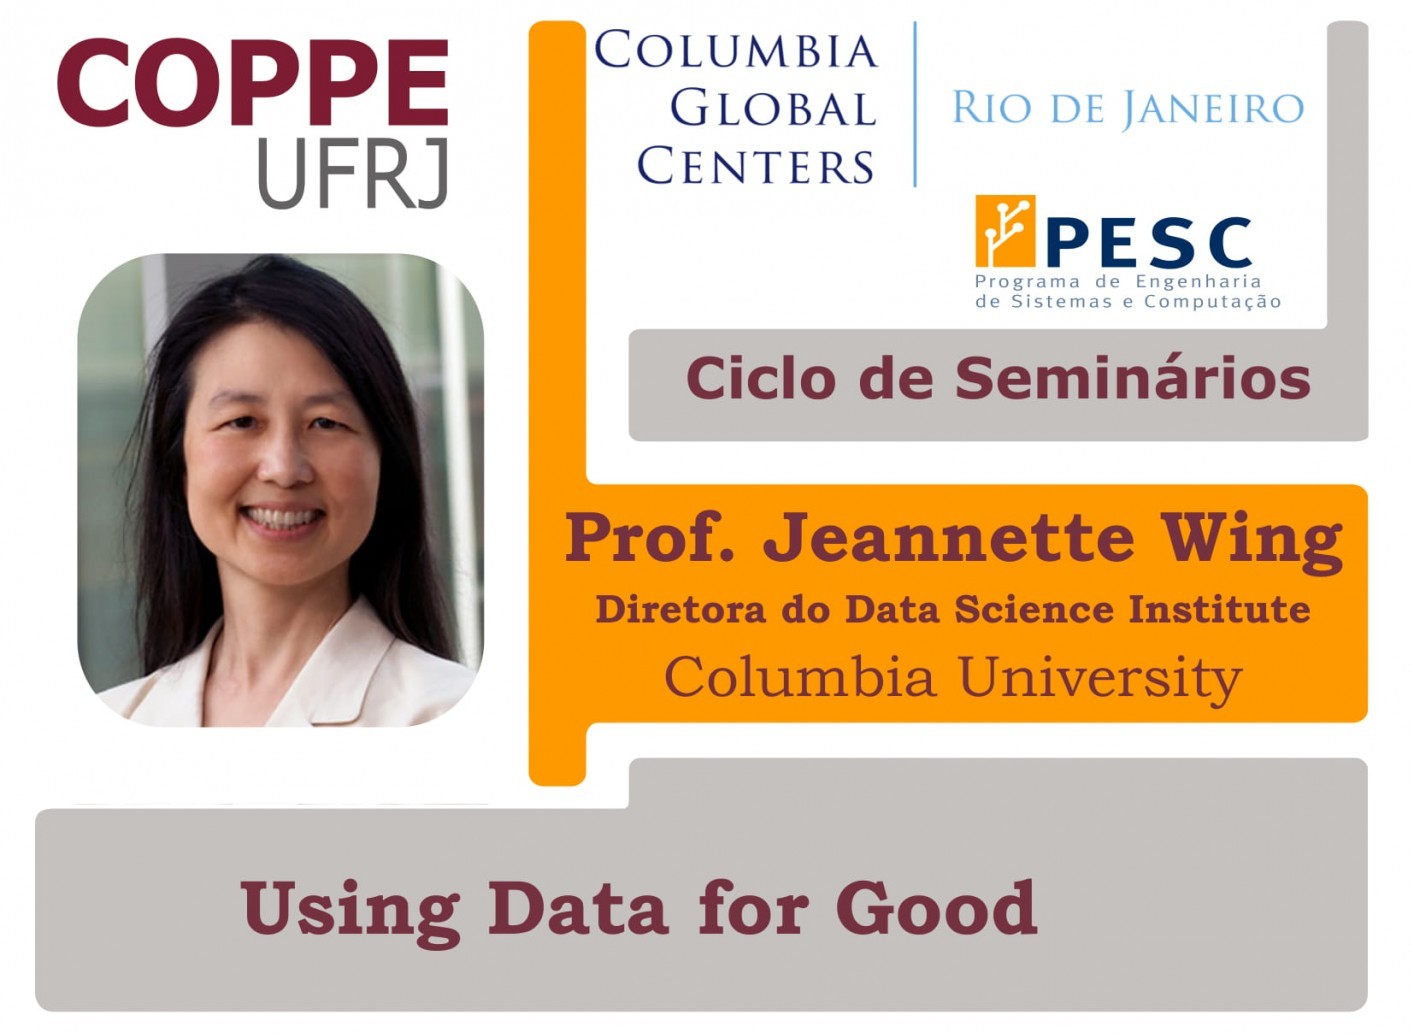 Invitation to the lecture about data science by professor Jeannette Wing